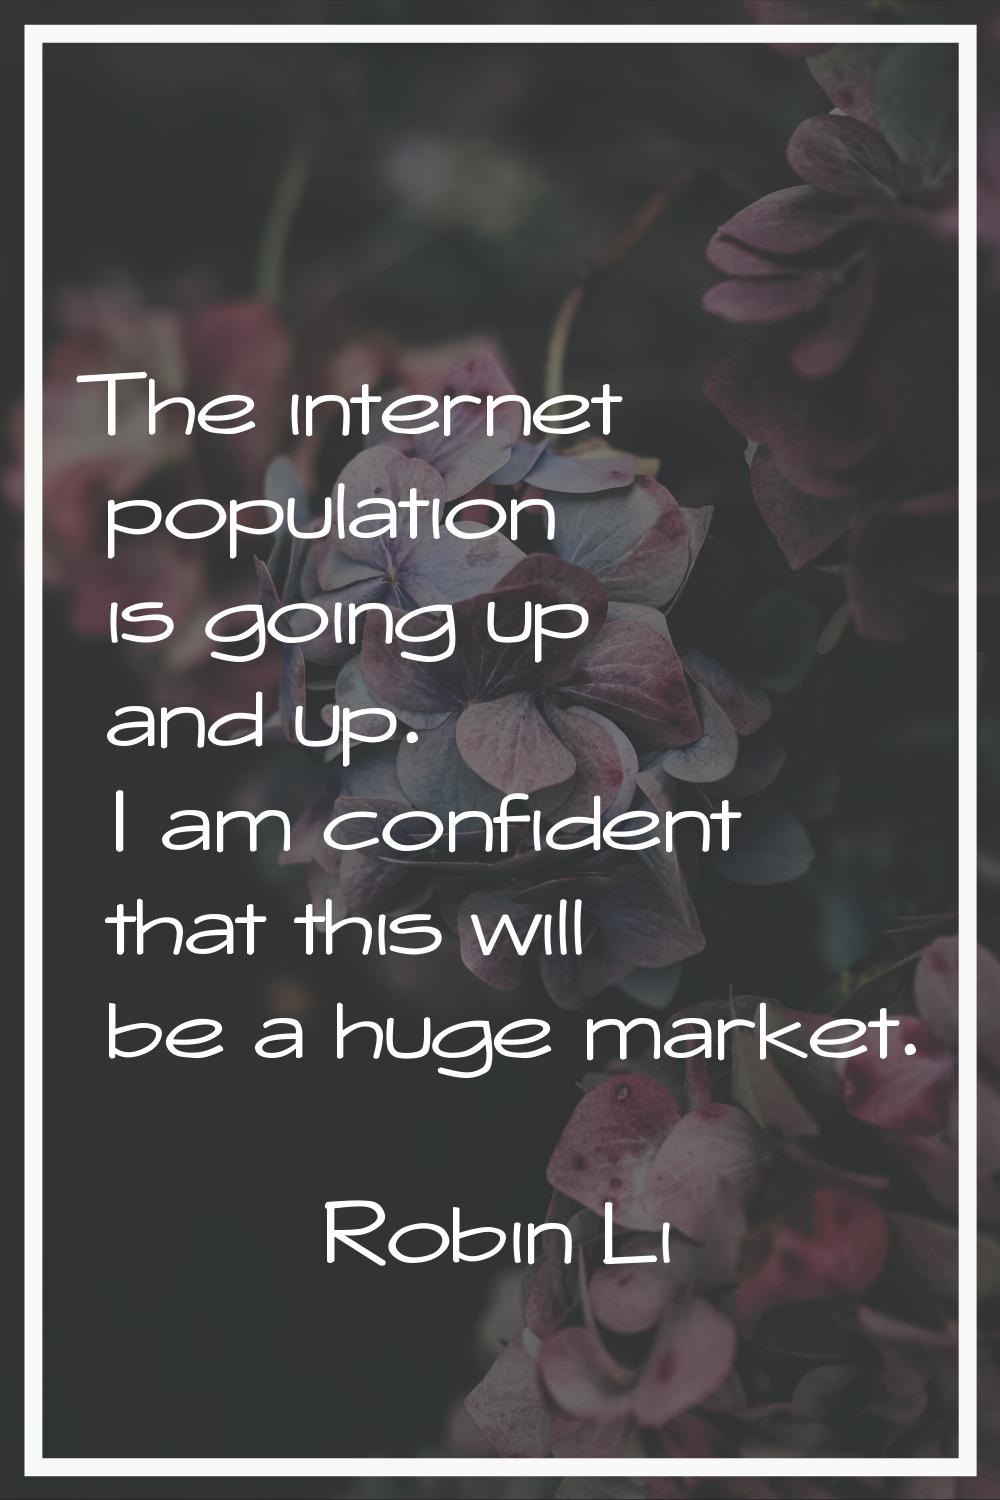 The internet population is going up and up. I am confident that this will be a huge market.